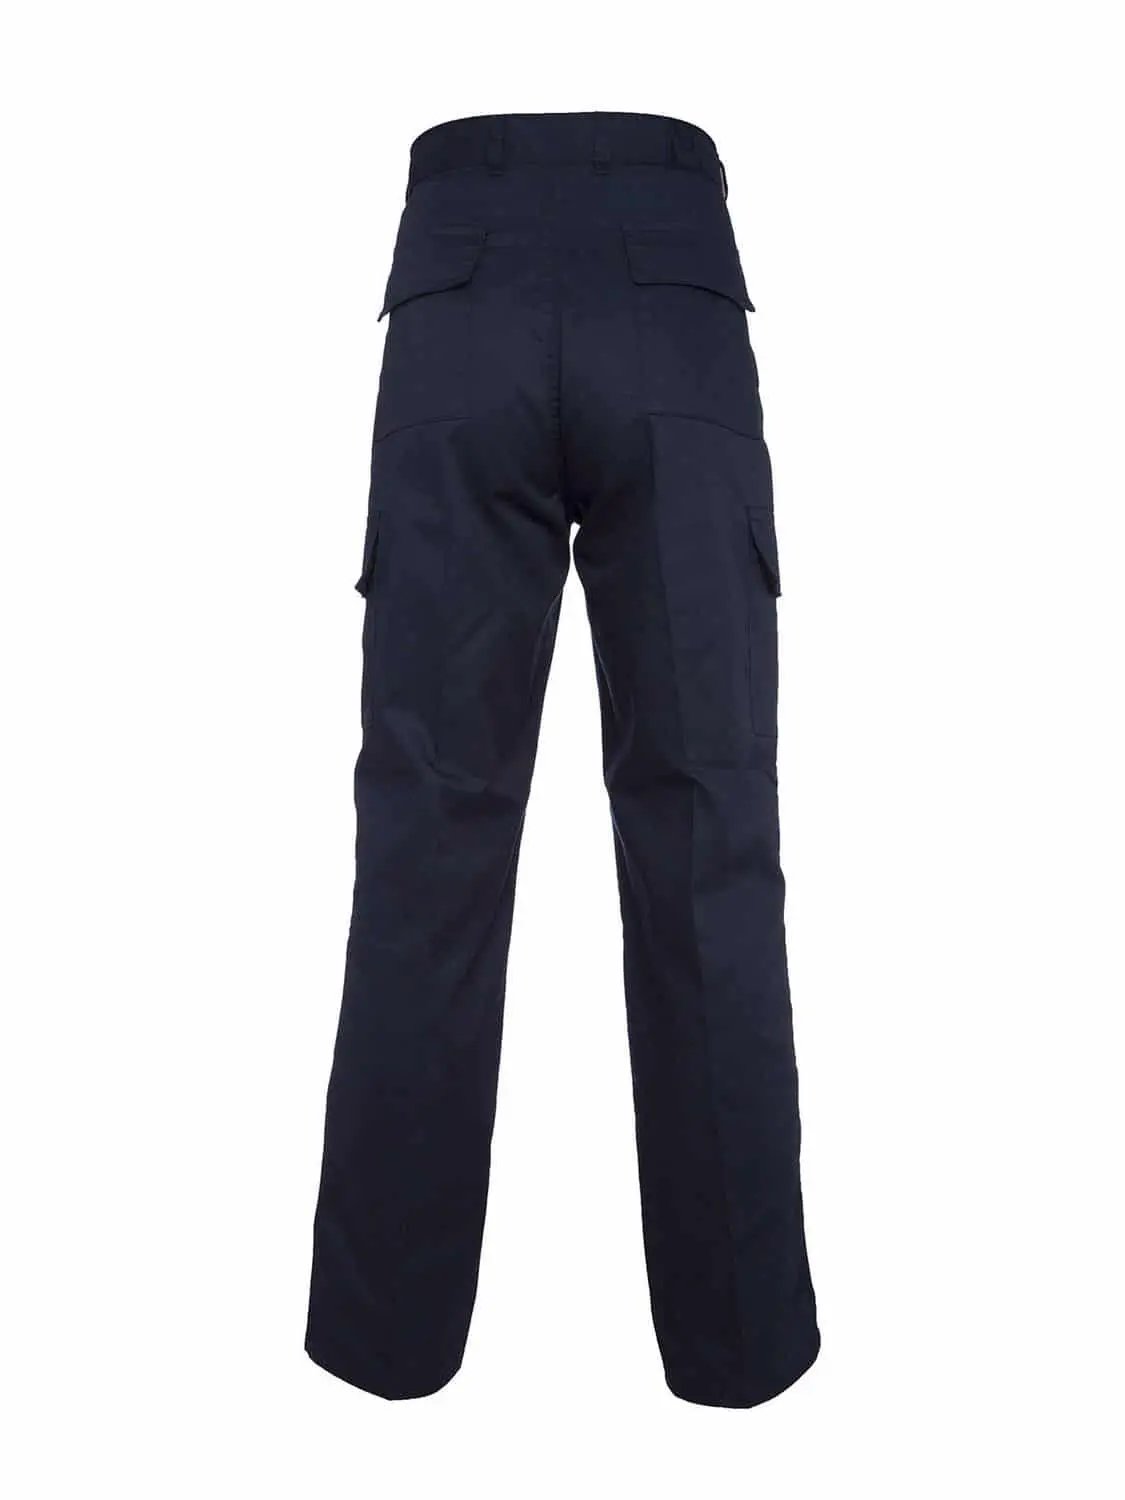 Uneek Cargo Trouser with Knee Pad Pockets - Navy, Back